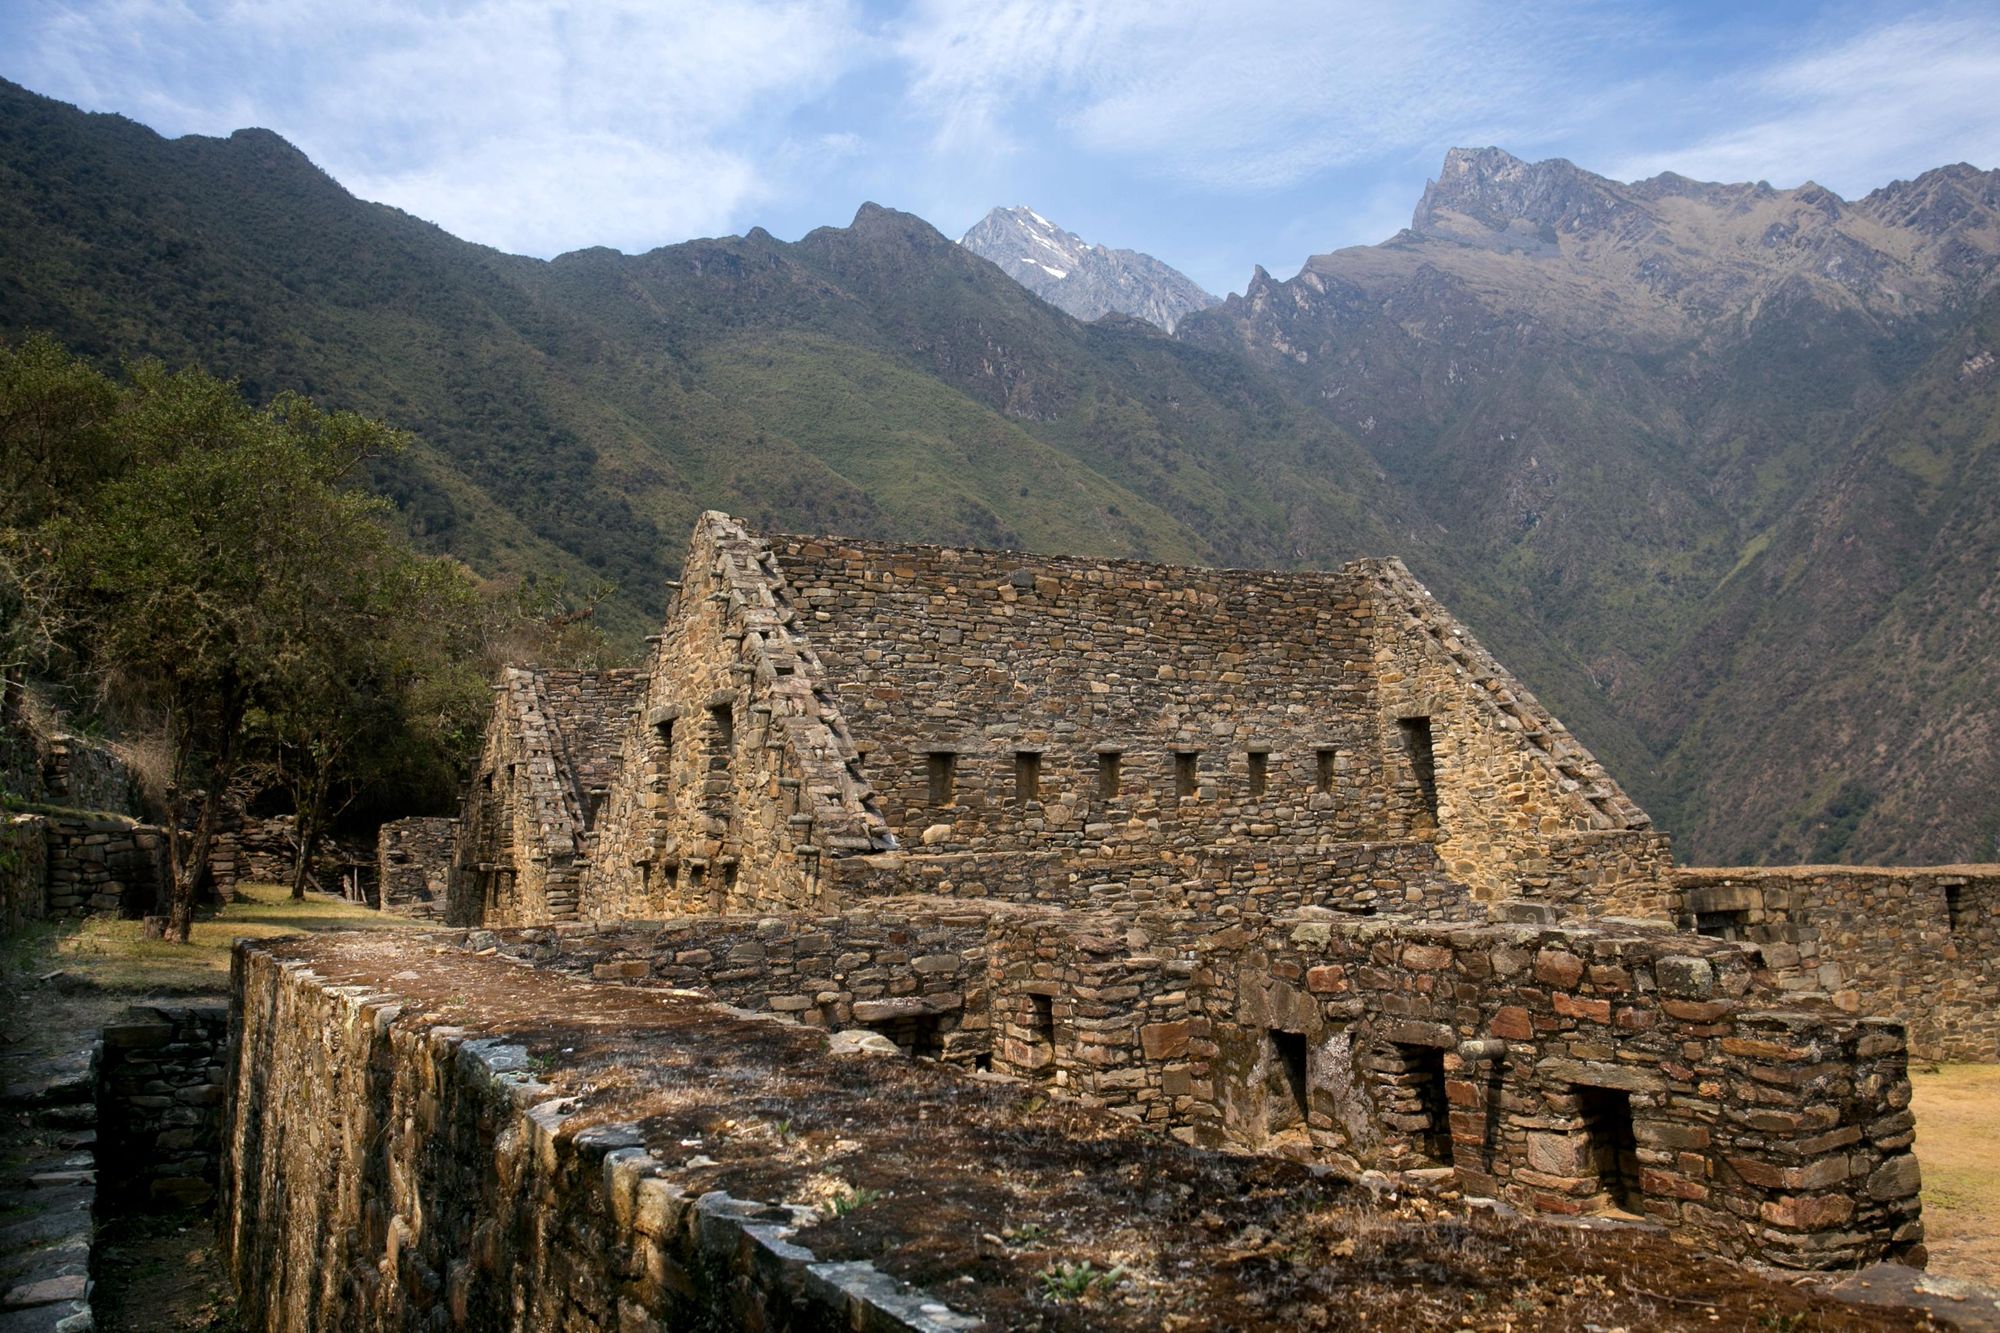 The ruins of Choquequirao, backdropped by the mighty Peruvian Andes. Photo: Getty